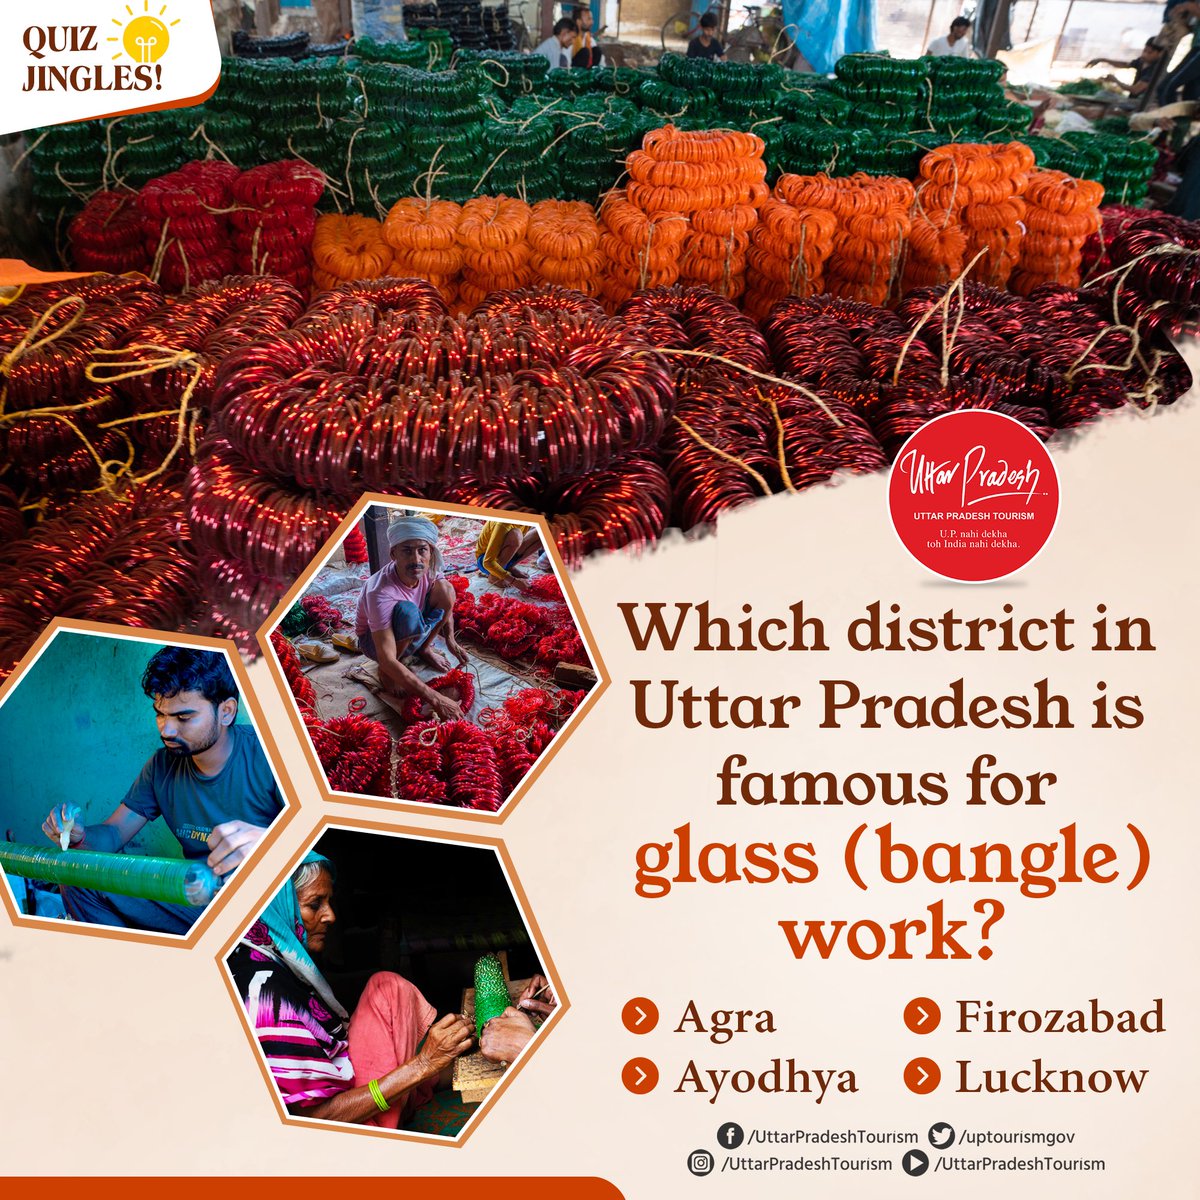 Let us know your answers in the comment section!

#GuessThePlace #GuessTheAnswer

#GlassBangles #UPTourism #UttarPradesh

@MukeshMeshram